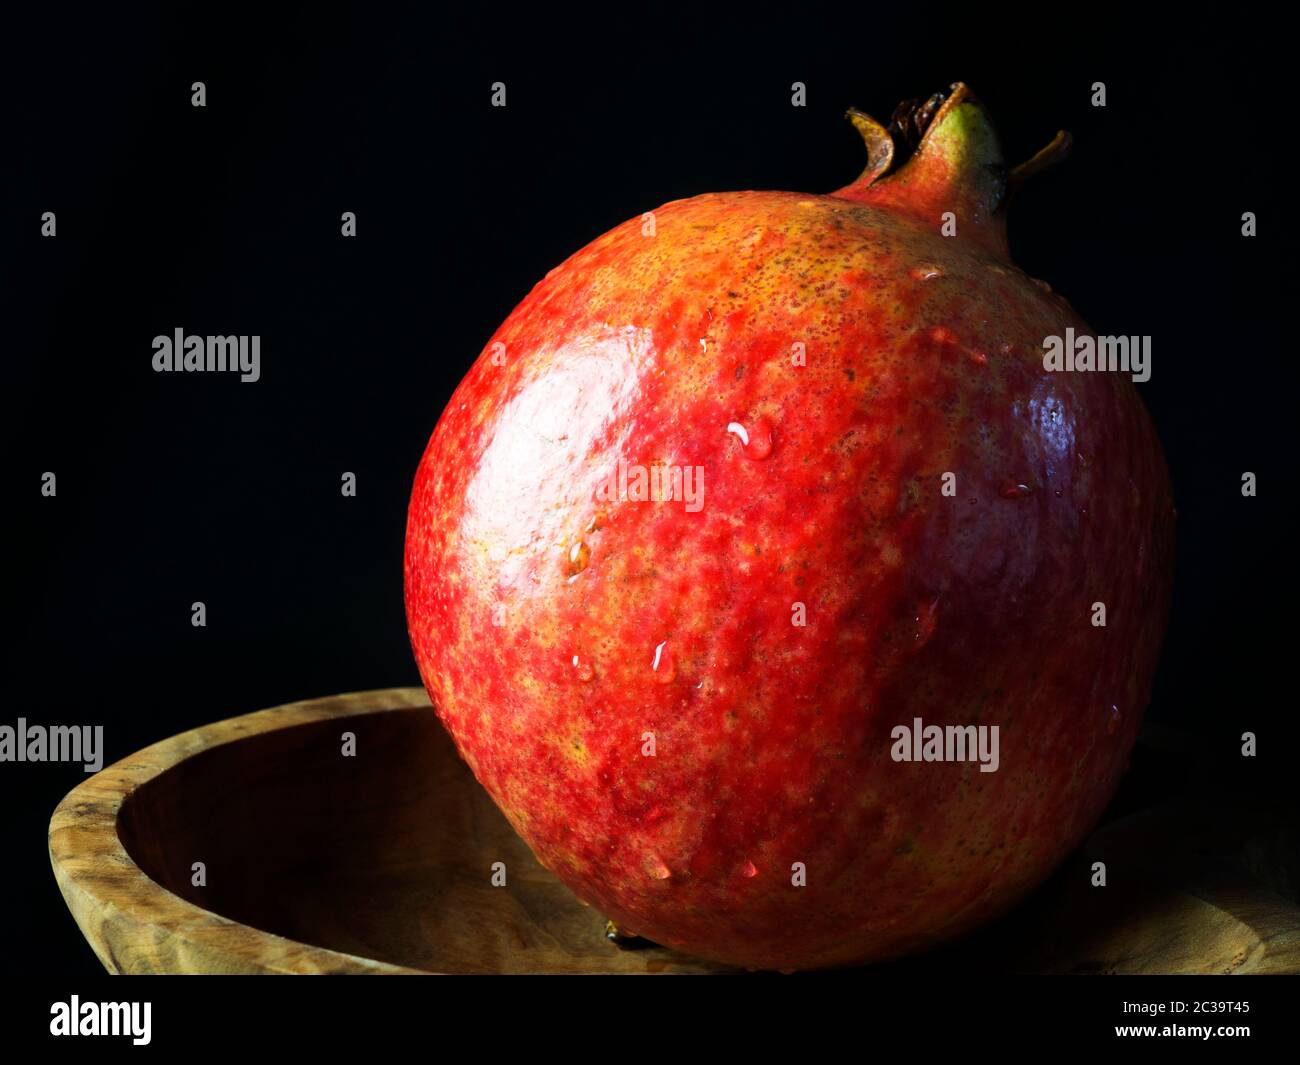 A single washed pomegranate with water droplets in a wooden dish against a black background Stock Photo